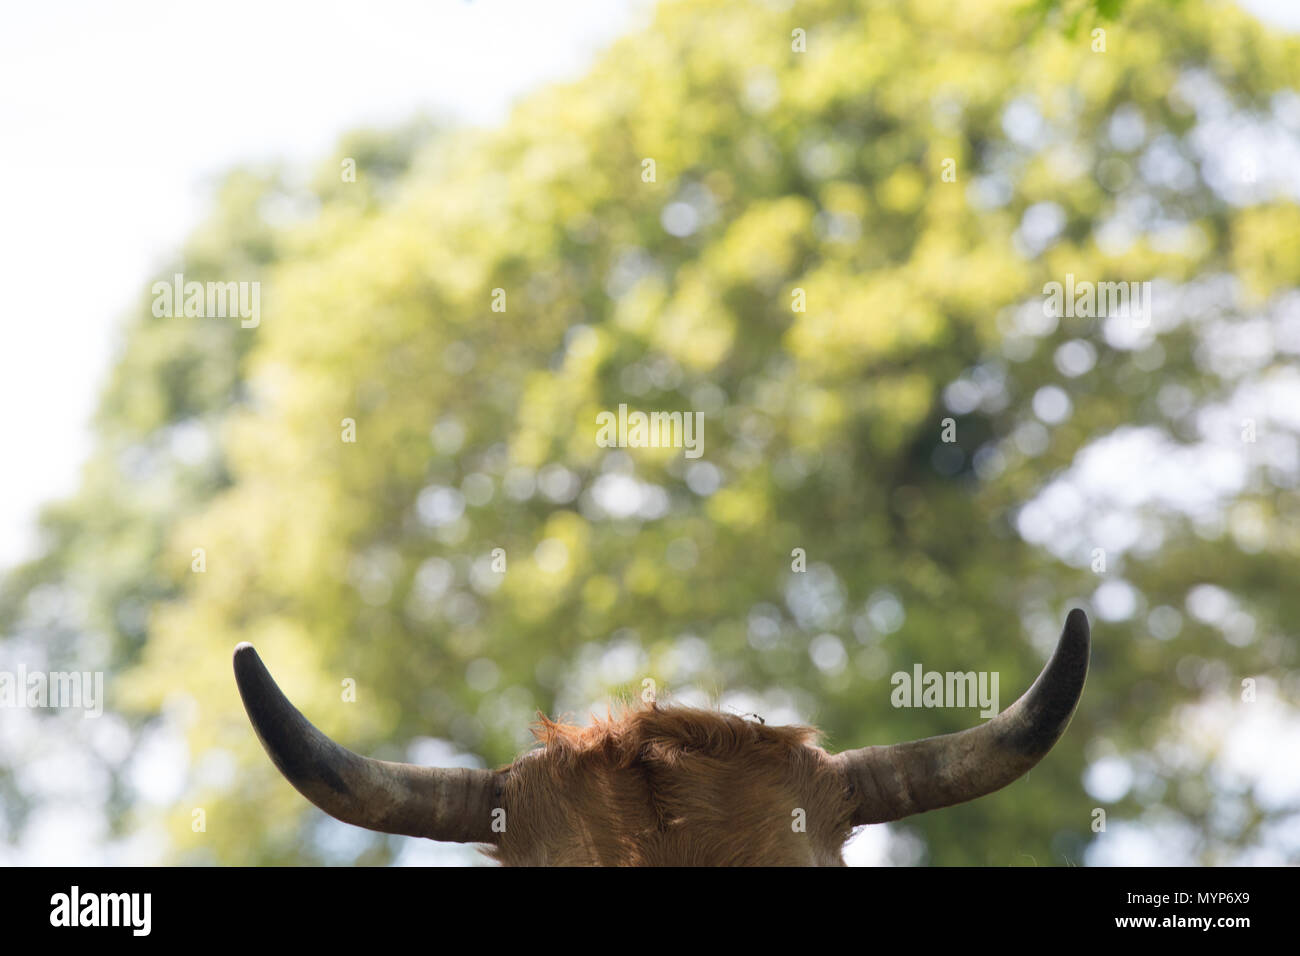 Head of a cow Stock Photo